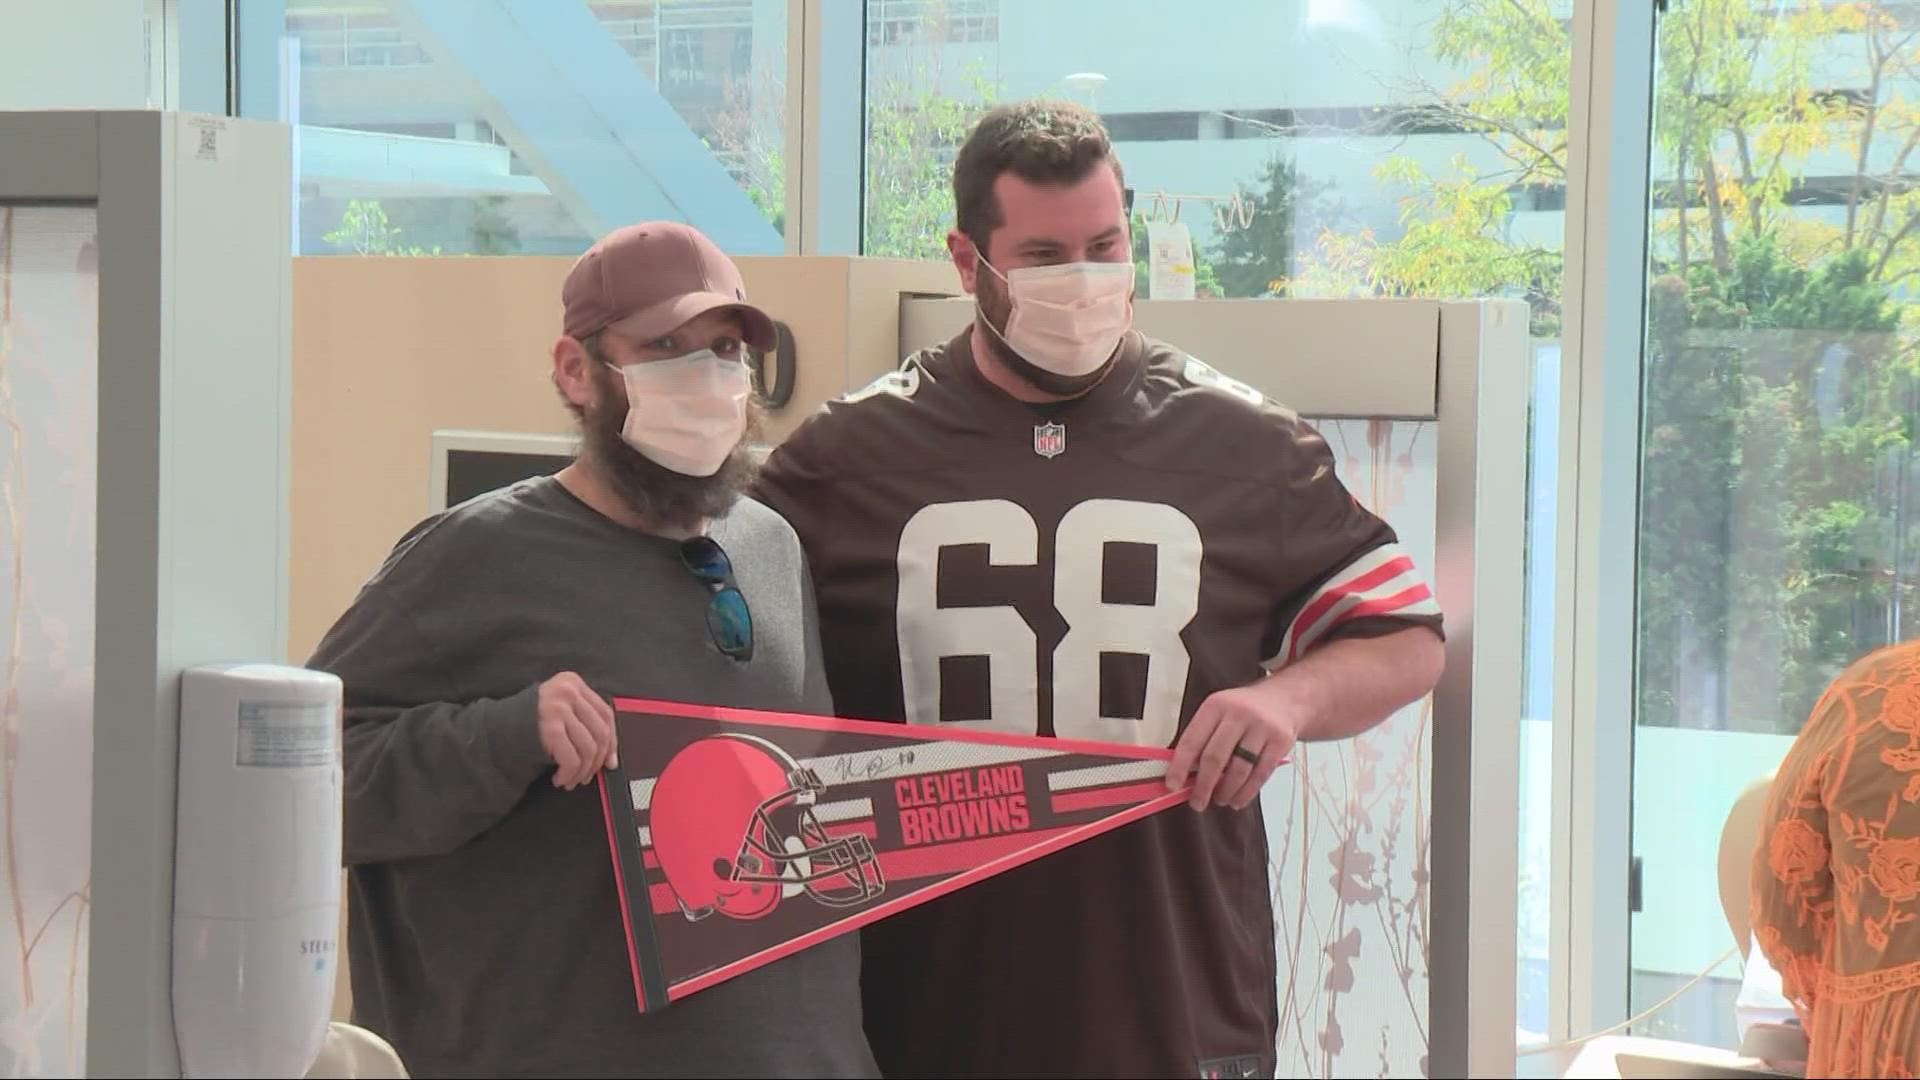 The players will visit the patients as part of the Browns Give Back initiative.